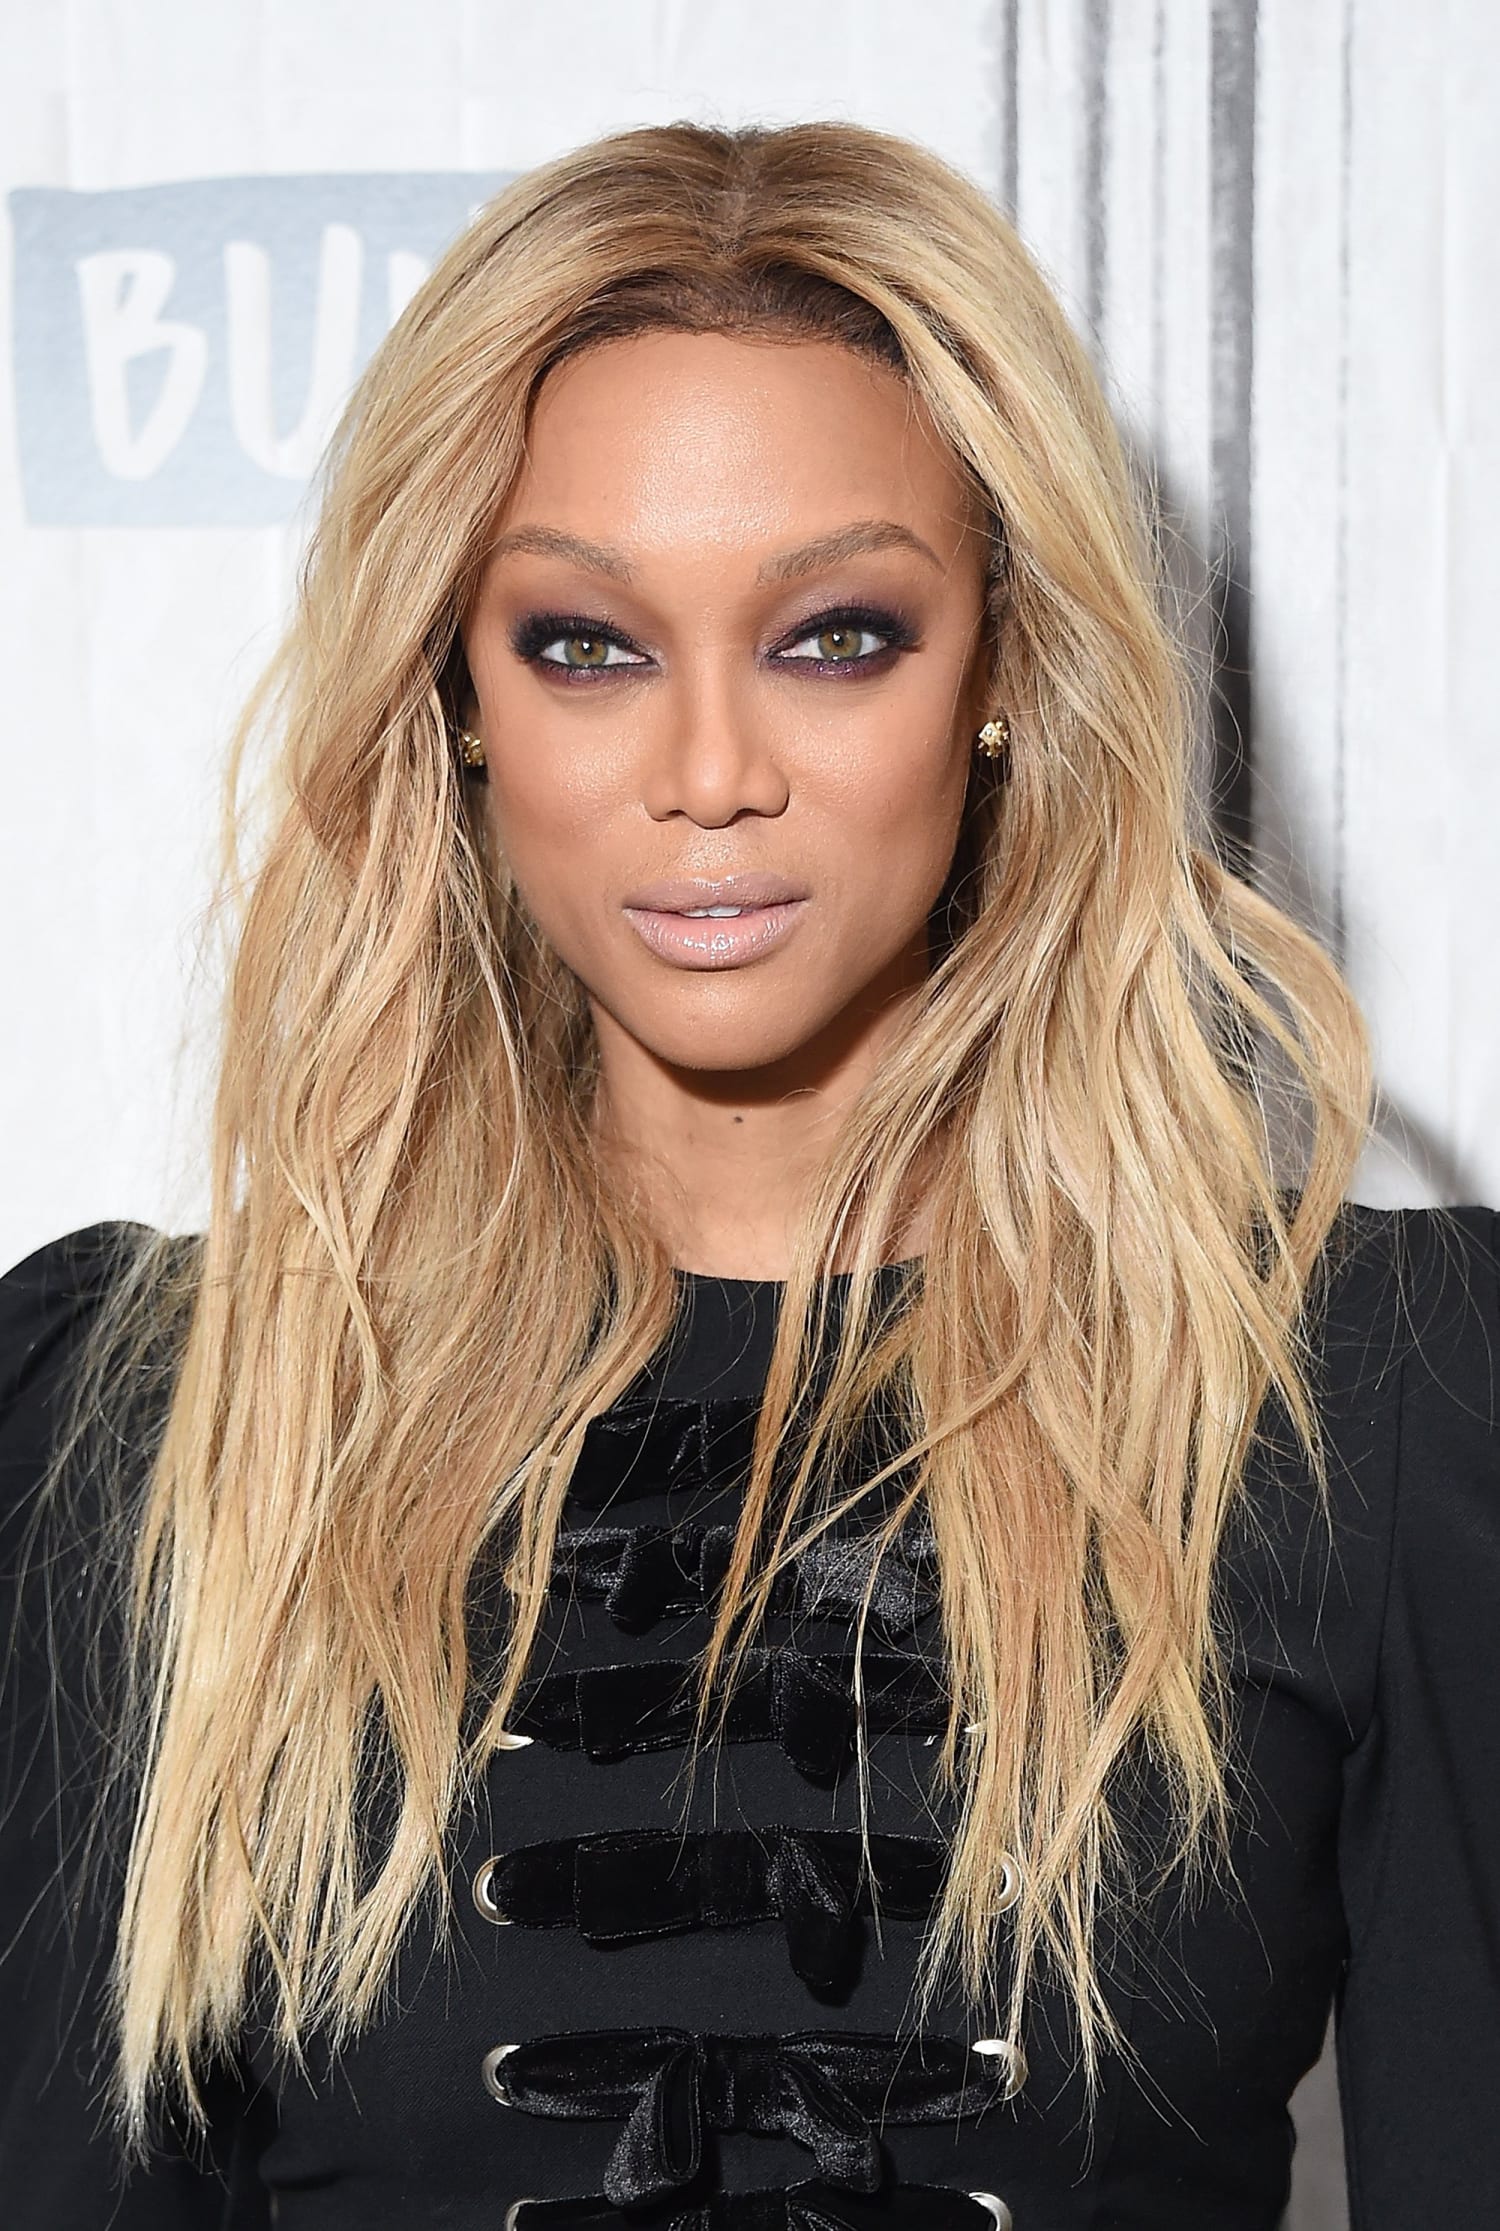 Tyra Banks is back on 'Top Model' and sharing anti-aging secrets